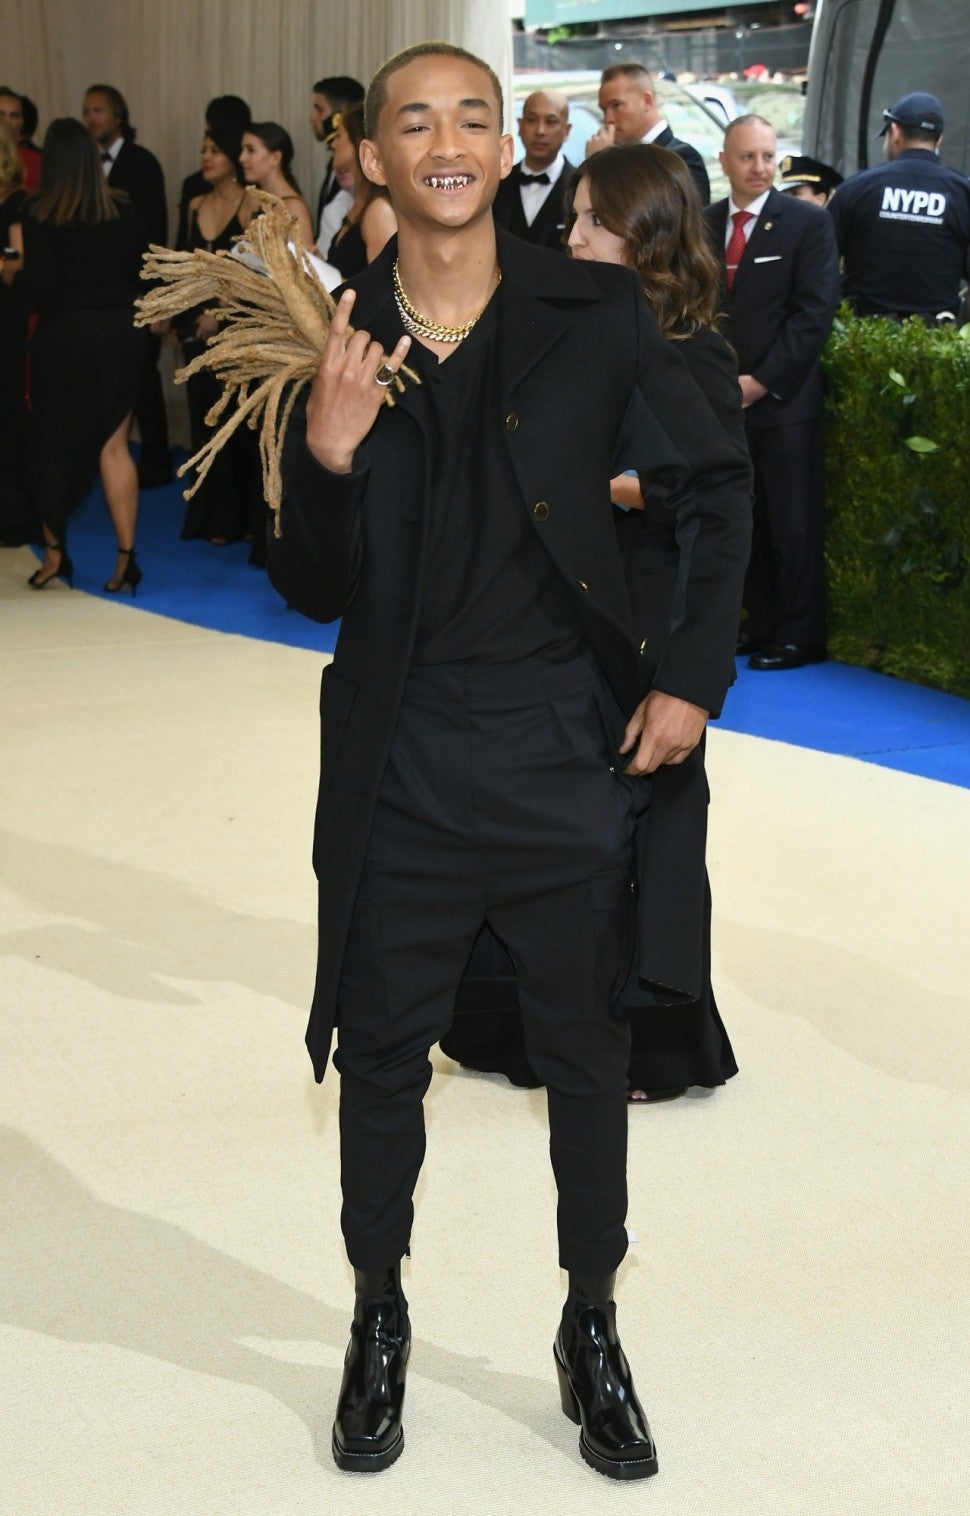 Remember when Jaden Smith carried his dreadlocks to the 2017 Met Gala